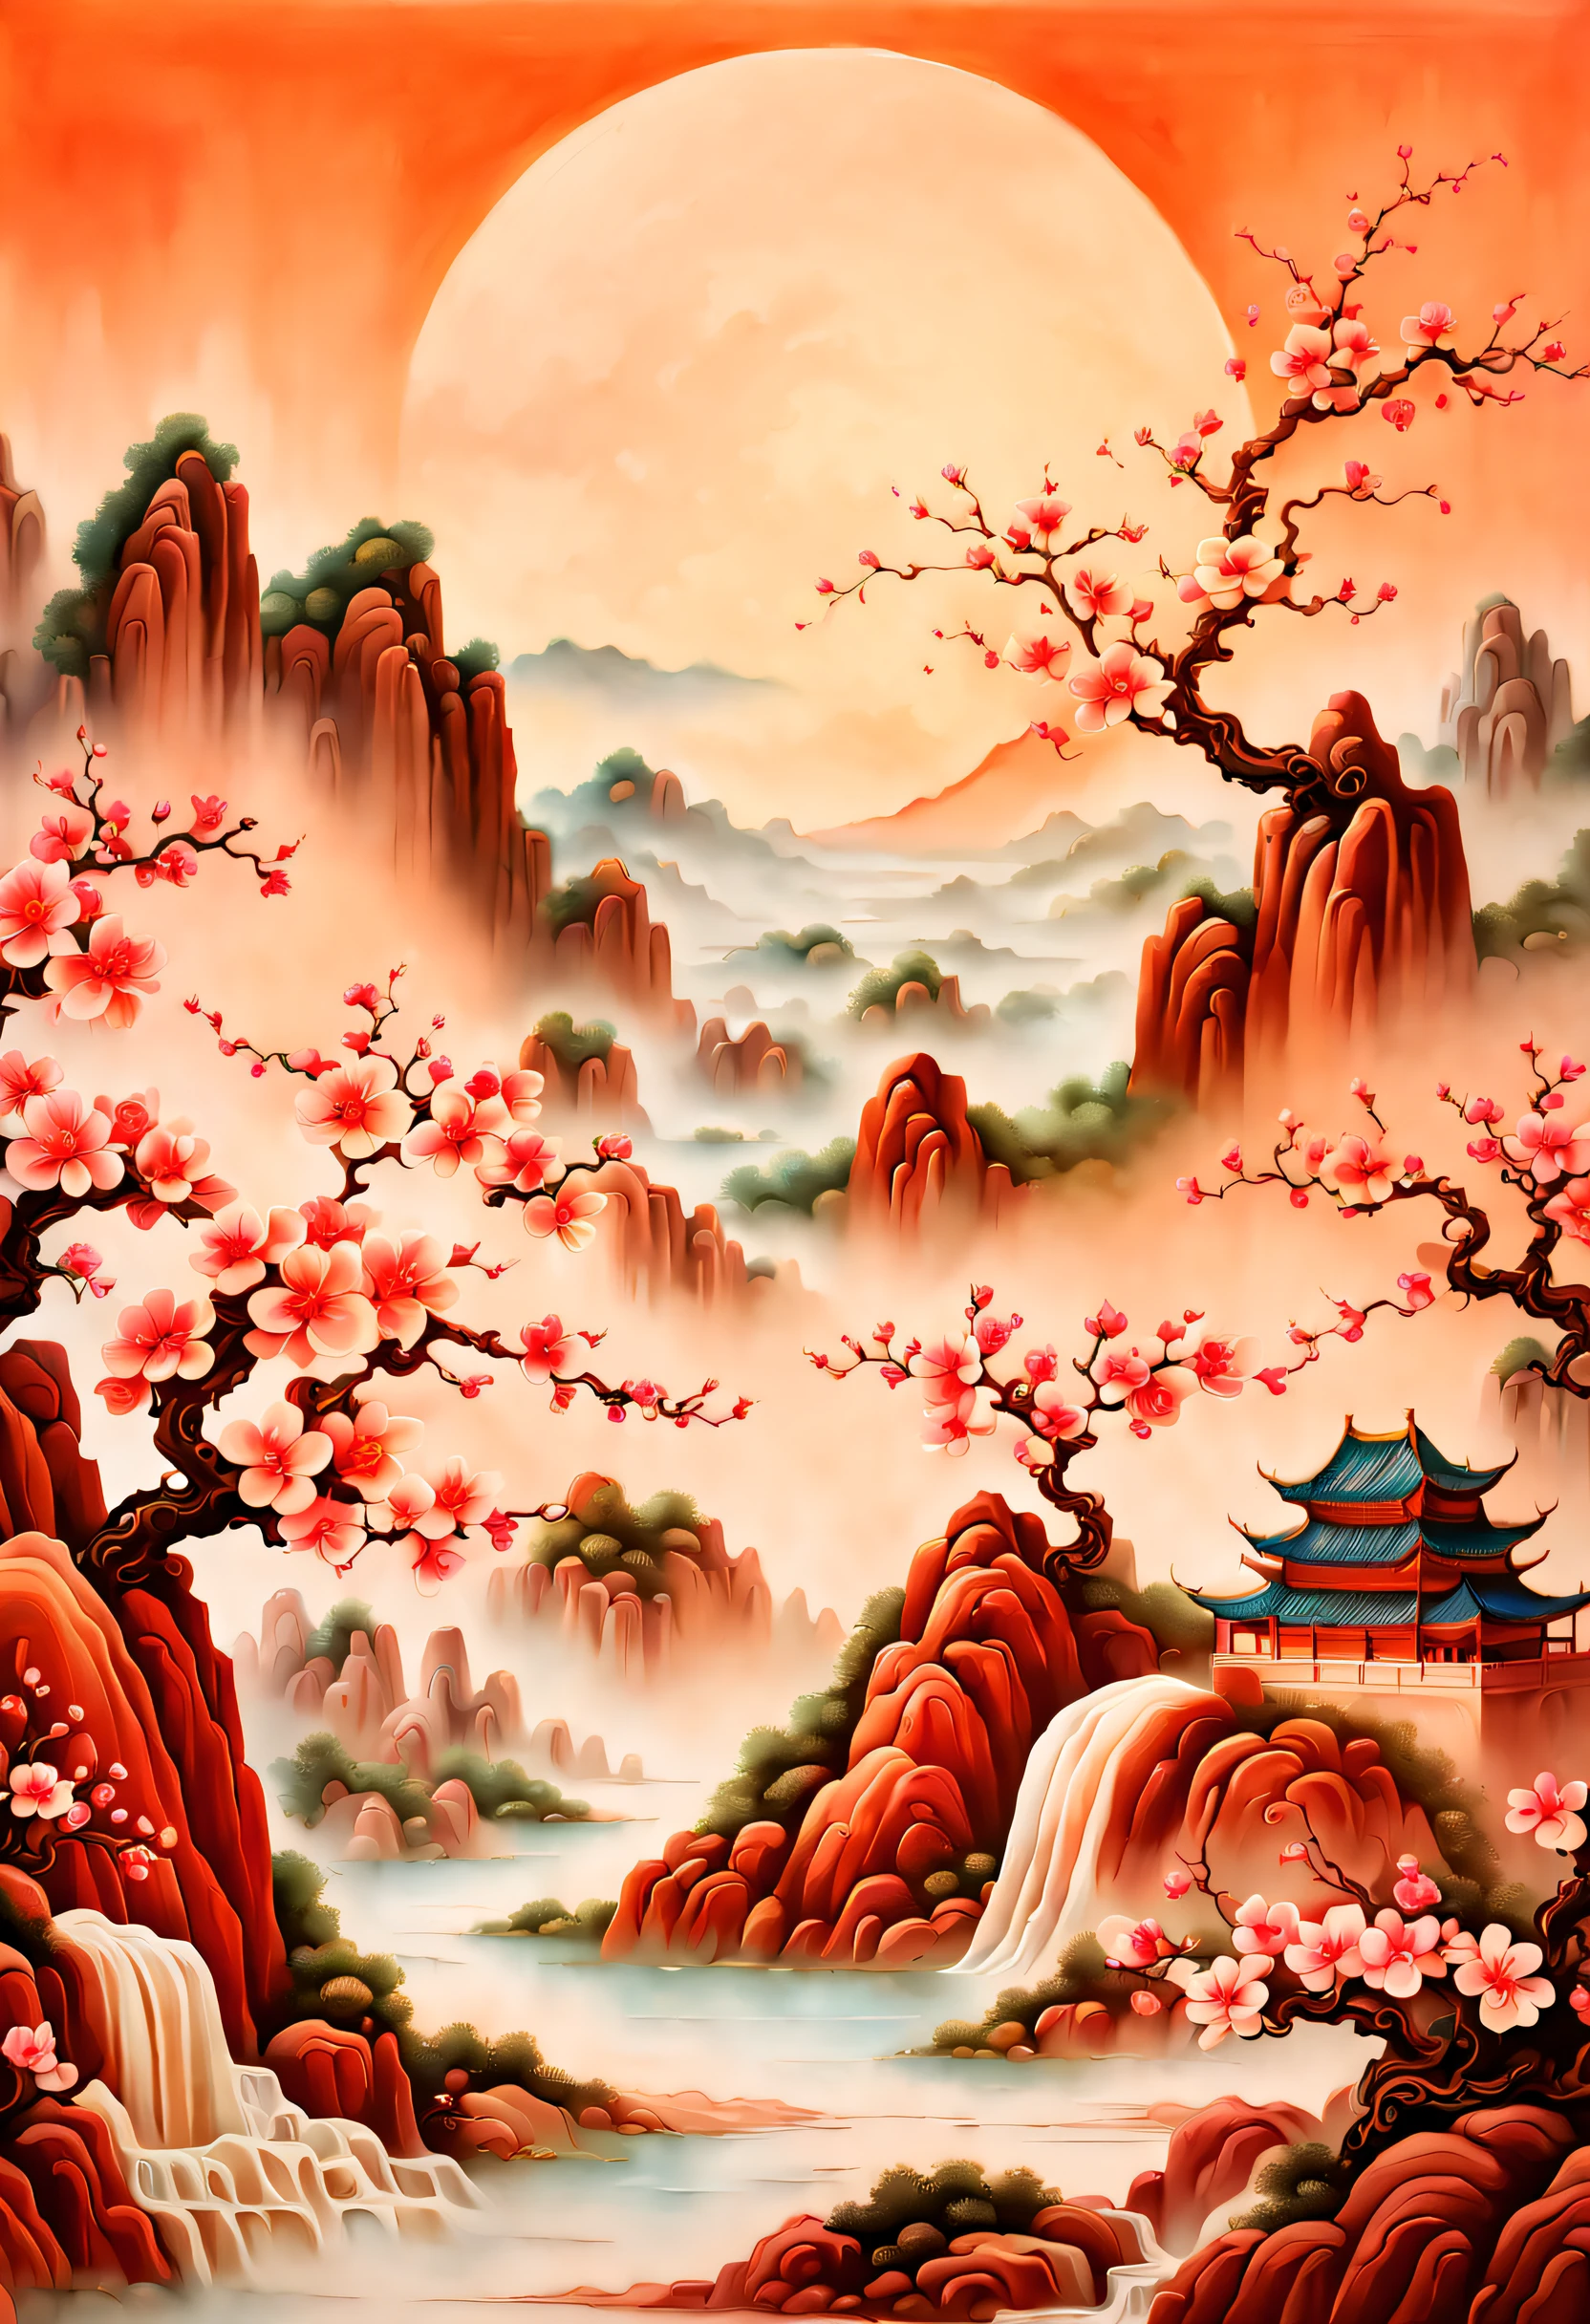 (Masterpiece, high quality, best quality, official art, beauty and aesthetics: 1.2), milk tea cup, surrounded by red rocks, splashing spray, (Chinese landscape paper carving, Chinese Song Dynasty landscape painting: 1.2), (surrealist dream style), cream organic fluid, light tracing, environmental shielding, hazy, natural light, limestone, gel resin sheet, oc rendering, (peach blossom forest background: 1.4),